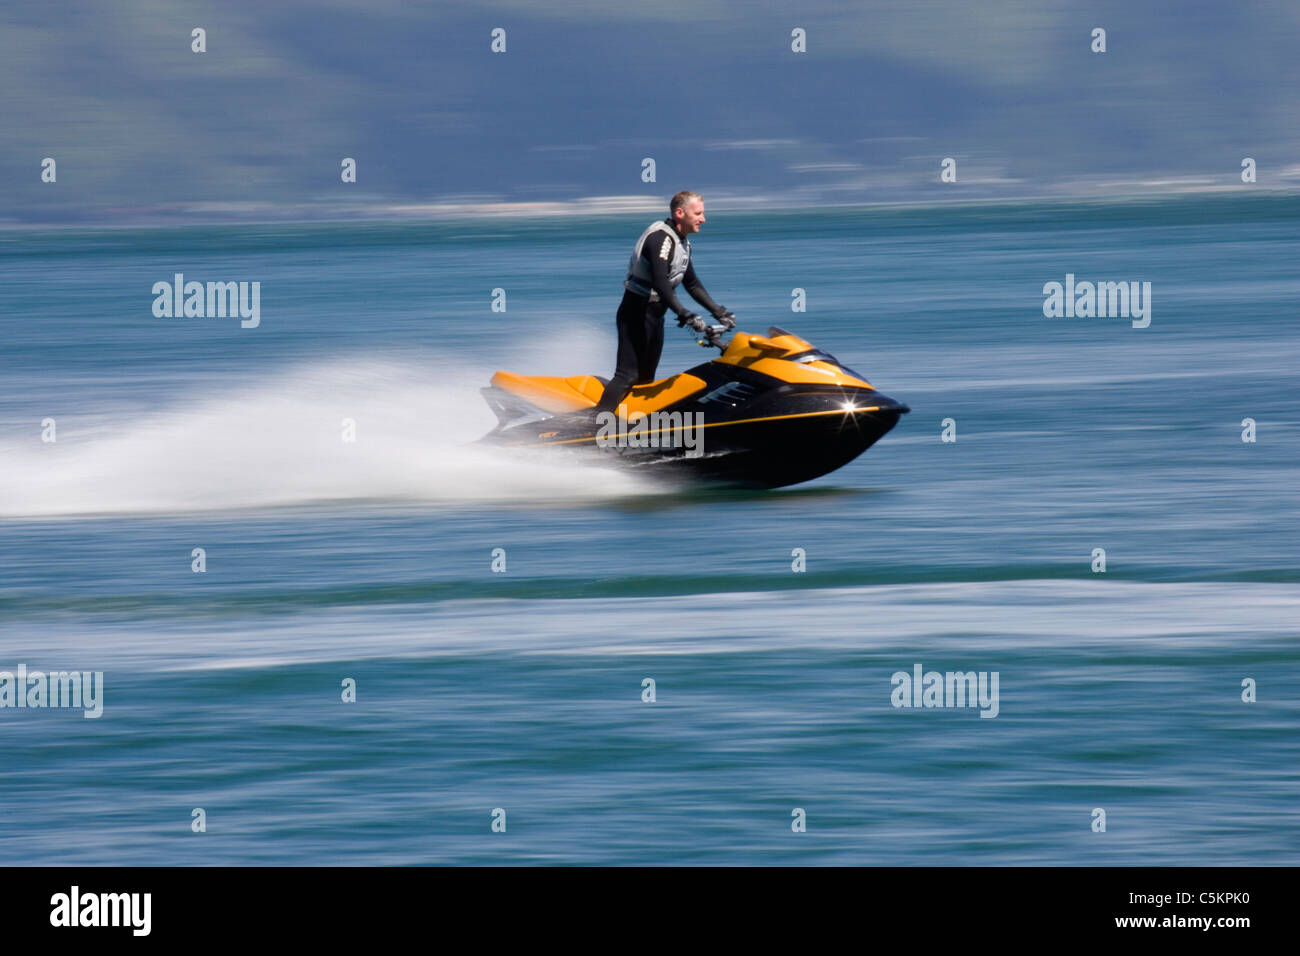 Man (30S) driving a jet-ski at speed while standing, wearing a wetsuit, with motion blur, Wellington, New Zealand Stock Photo